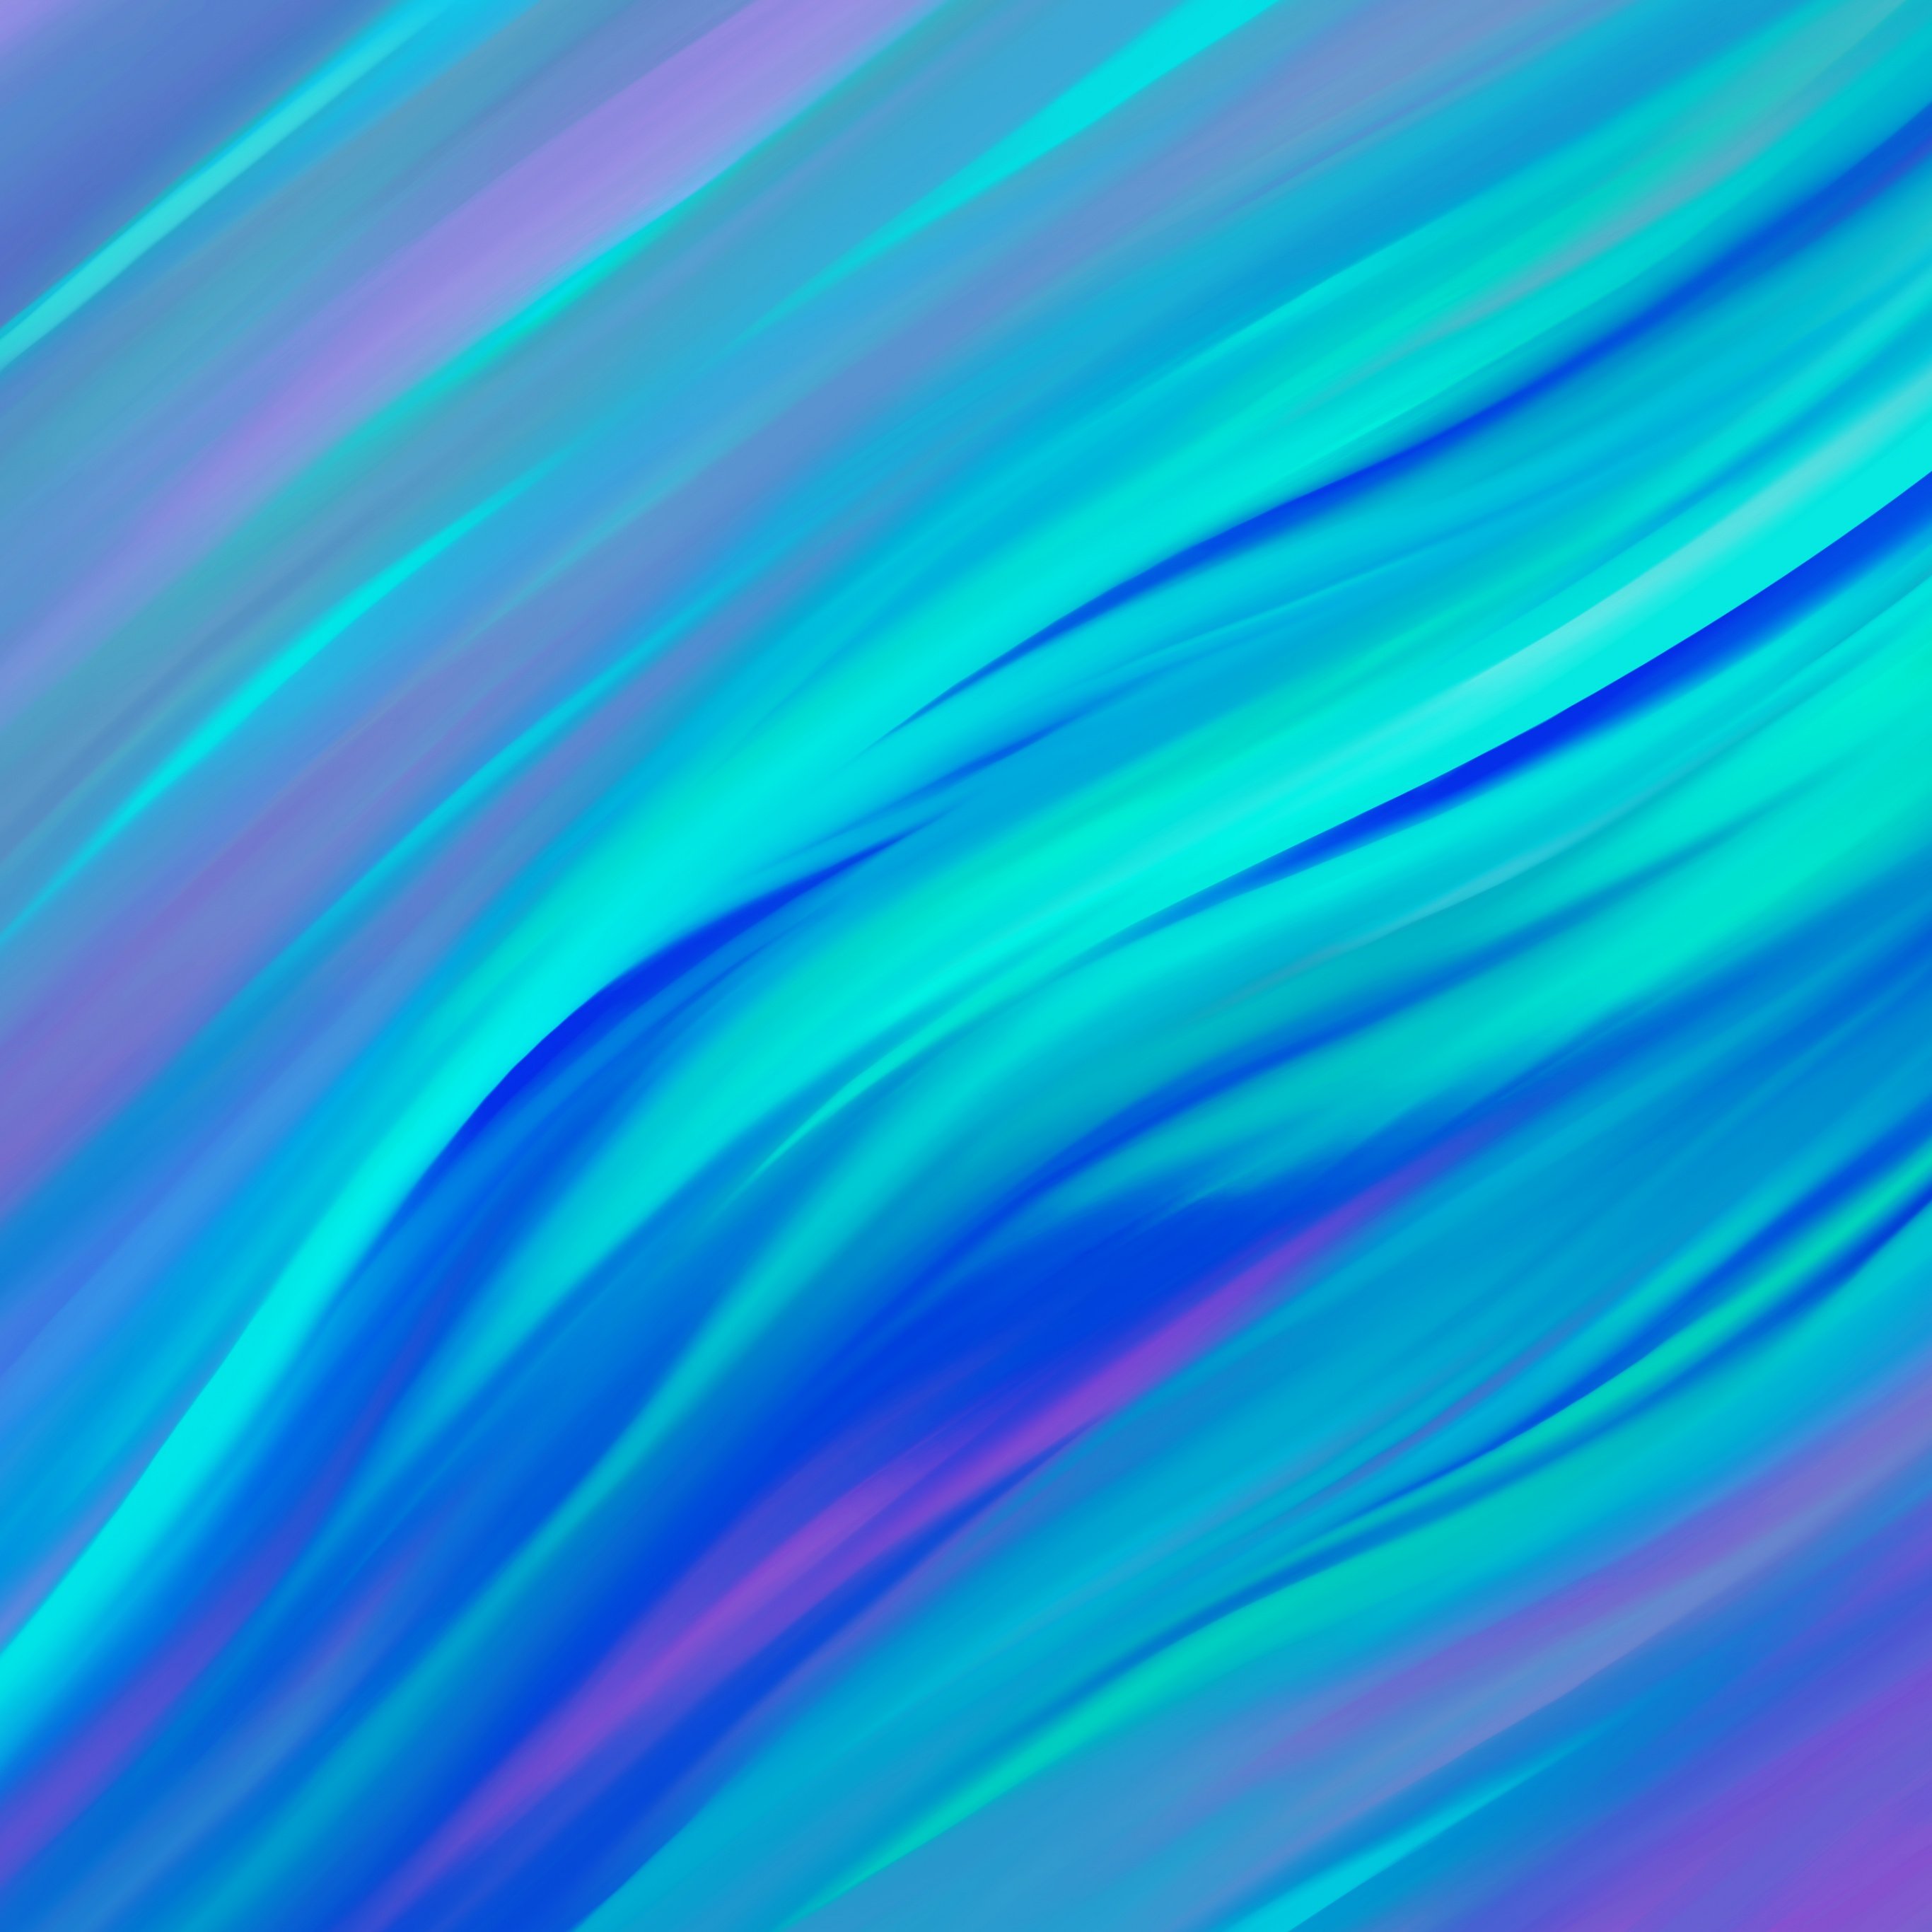 Gradients Wallpaper 4K, Blue, River, Colorful, Chromatic, 5K, Abstract